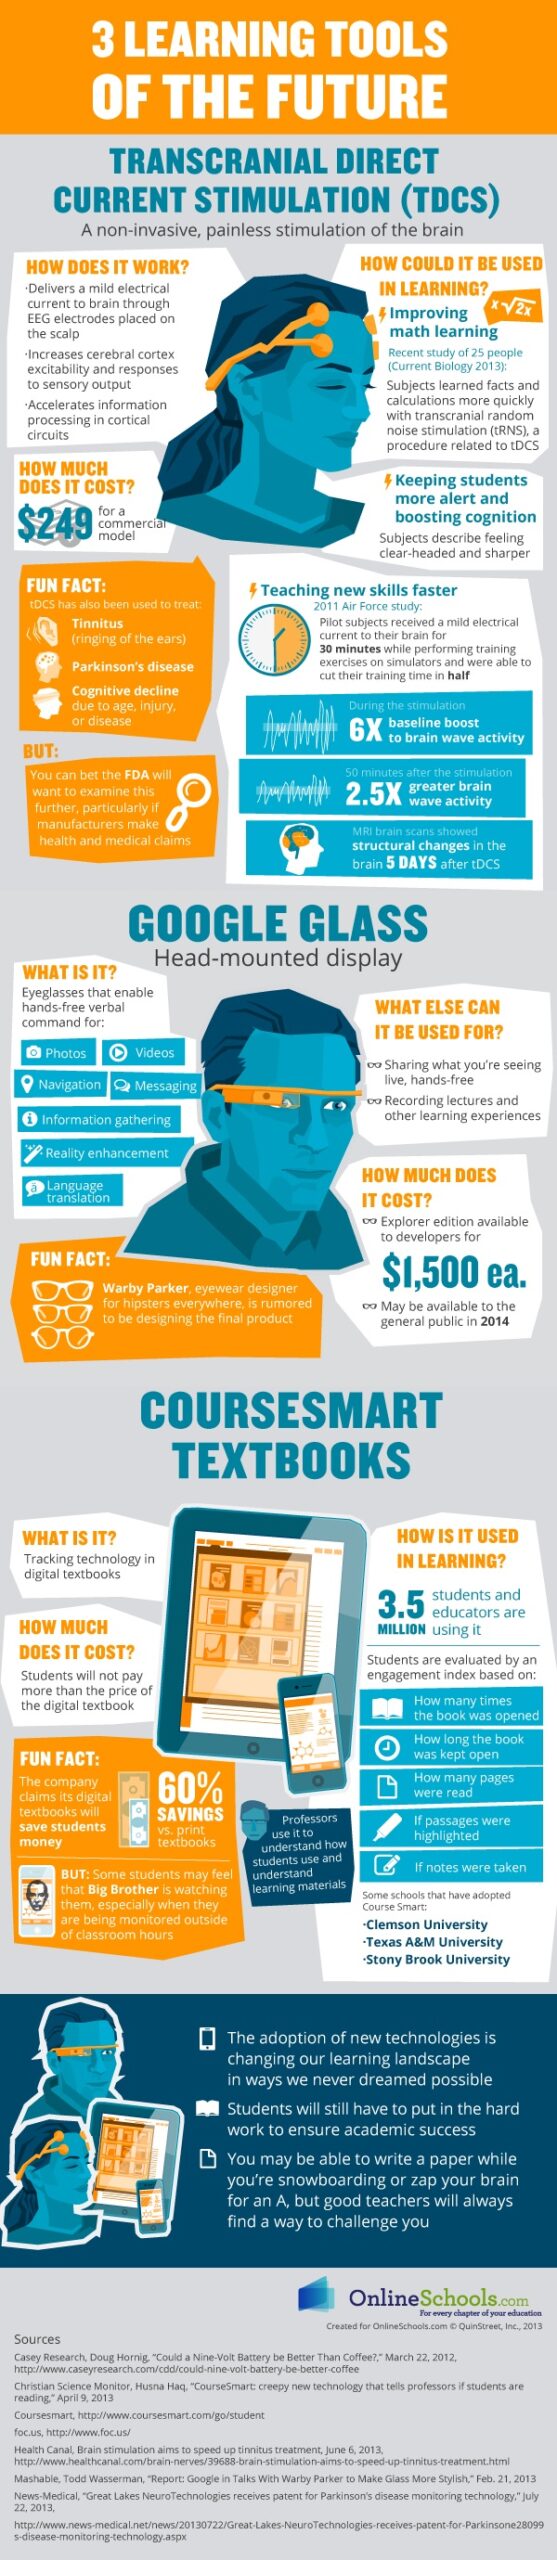 Learning-Tools-of-the-Future-Infographic